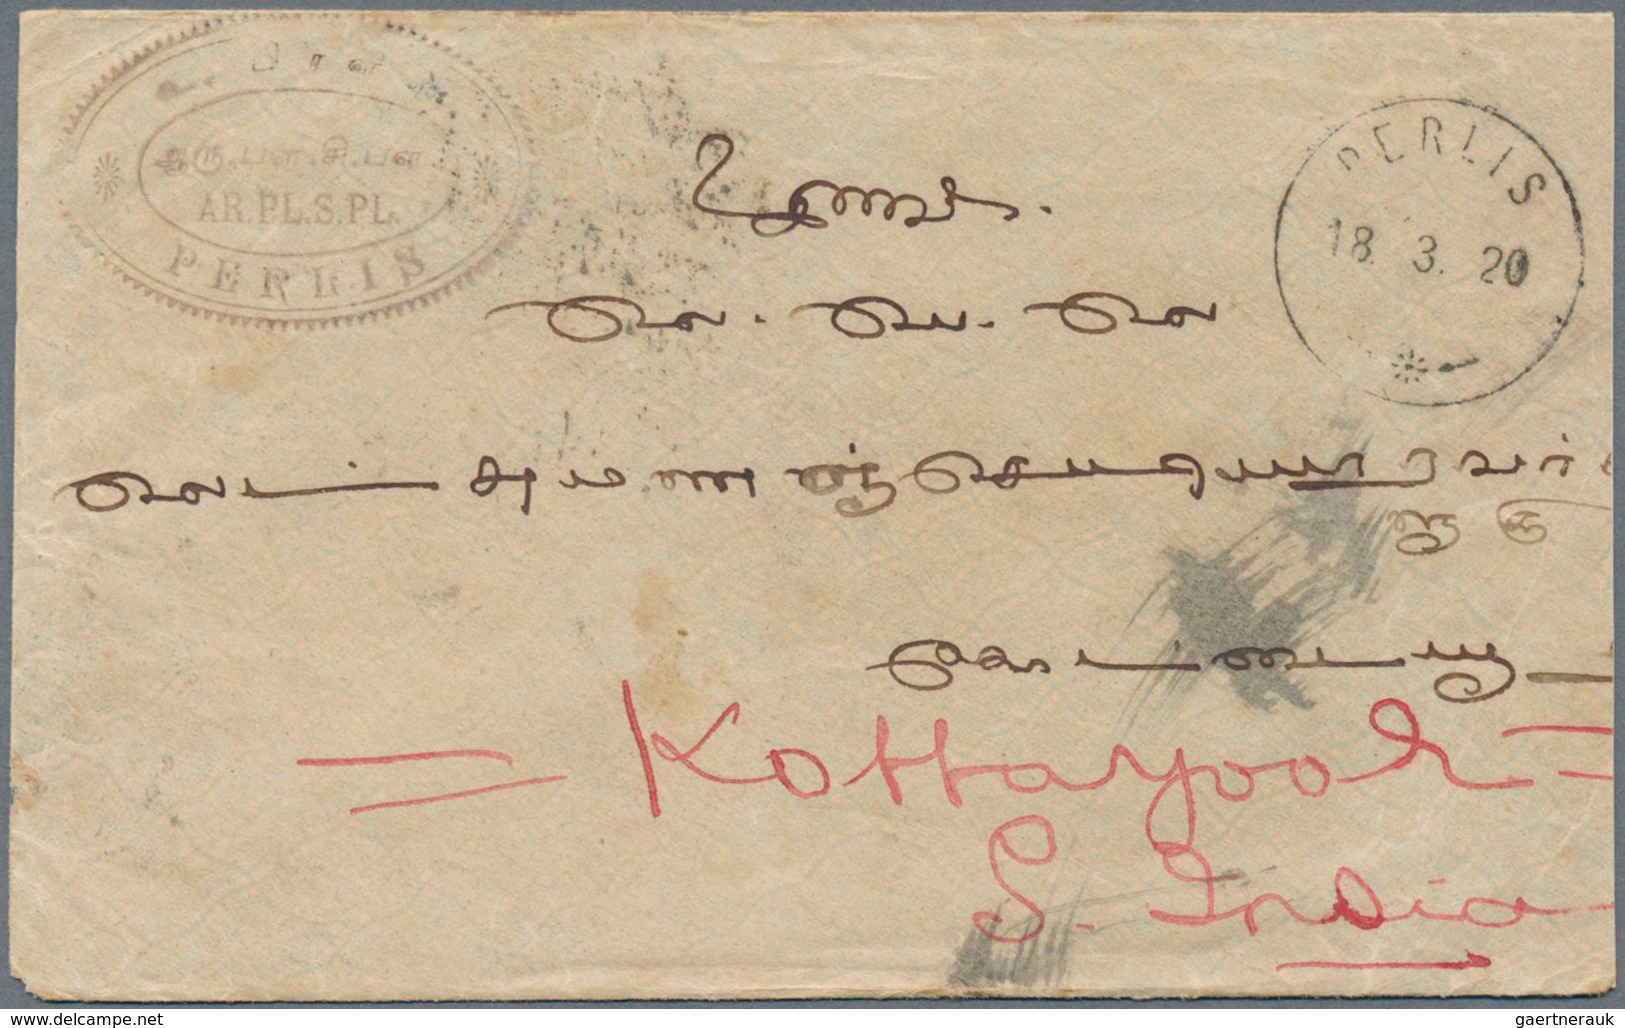 Malaiische Staaten - Perlis: 1920 Cover From PERLIS To India Franked On The Reverse By Kedah 4c. Red - Perlis